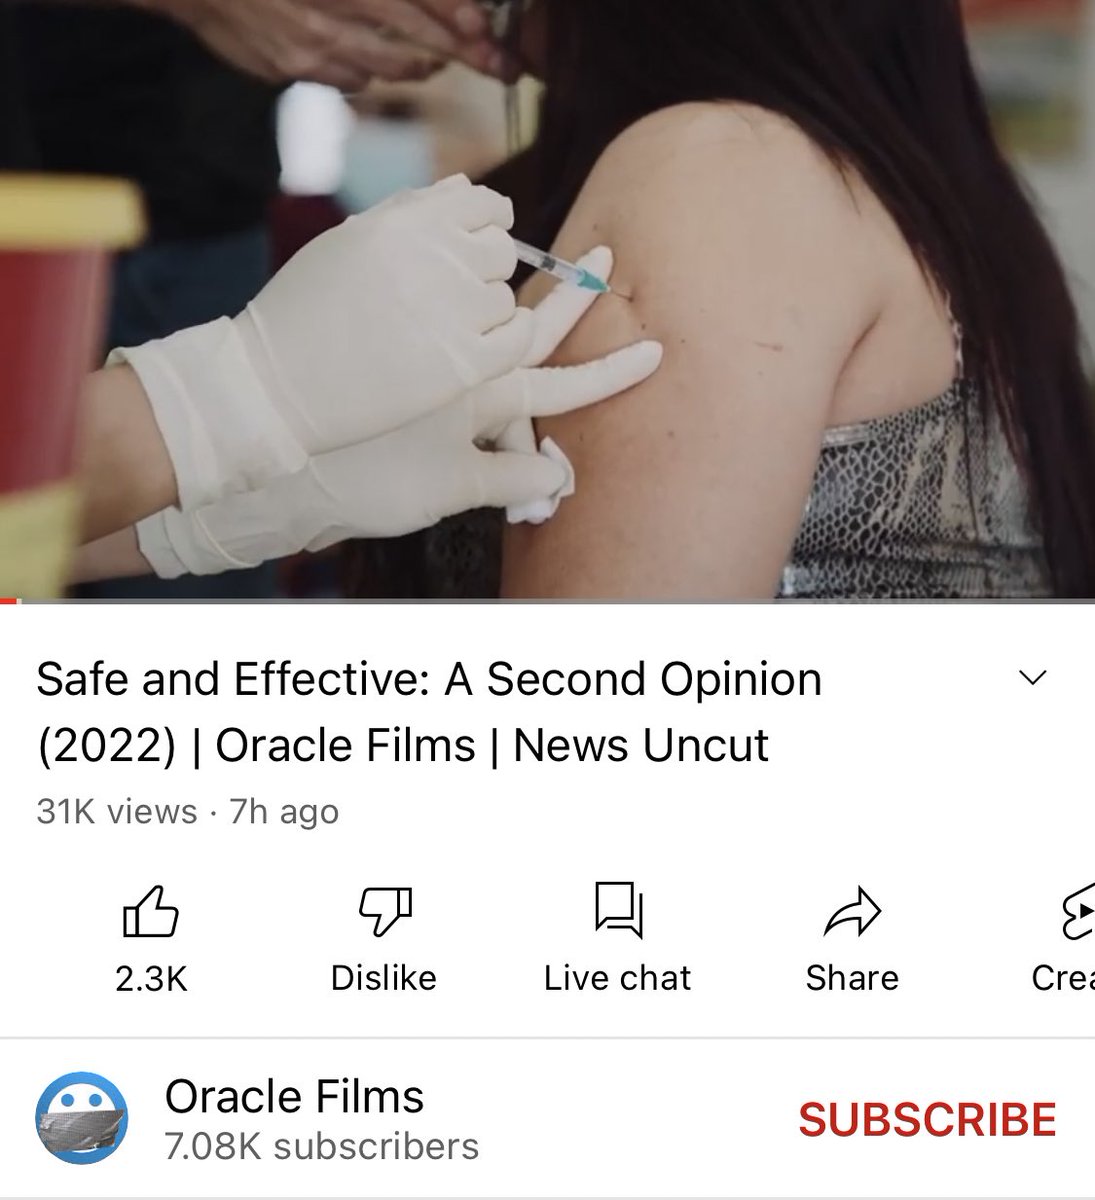 If you have 55 minutes watch this now before they take it down and send it to a friend. New film from @OracleFilmsUK out today. “Safe and Effective: A Second Opinion” - WATCH: youtu.be/dIVZ5ssWB-o